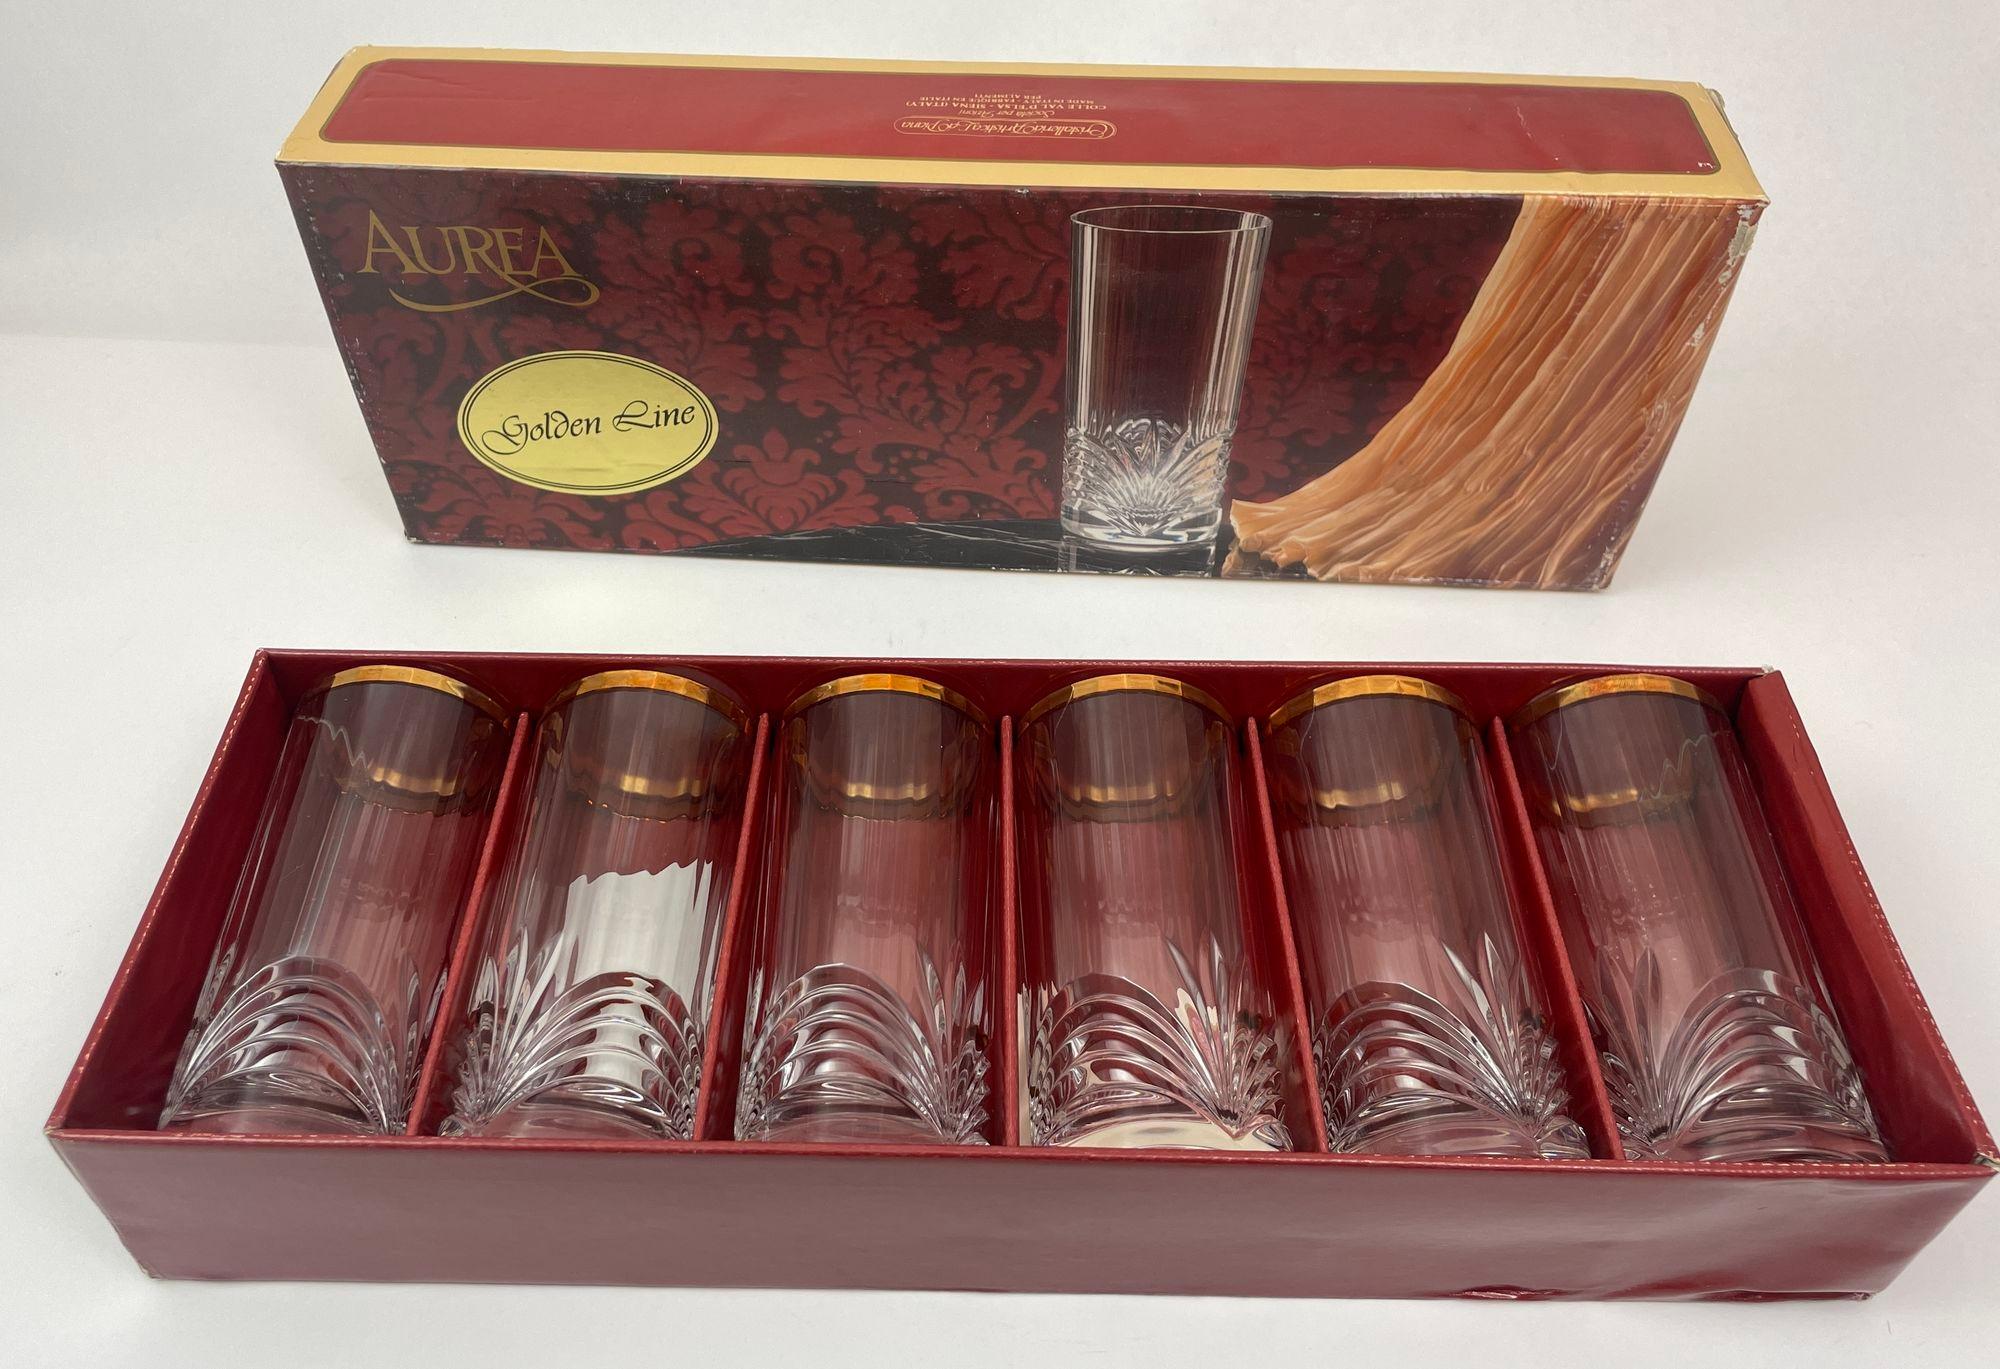 Royal Crystal Rock Aurea Tumbler Highball Glasses in Box Vintage Set of 6 In Good Condition For Sale In North Hollywood, CA